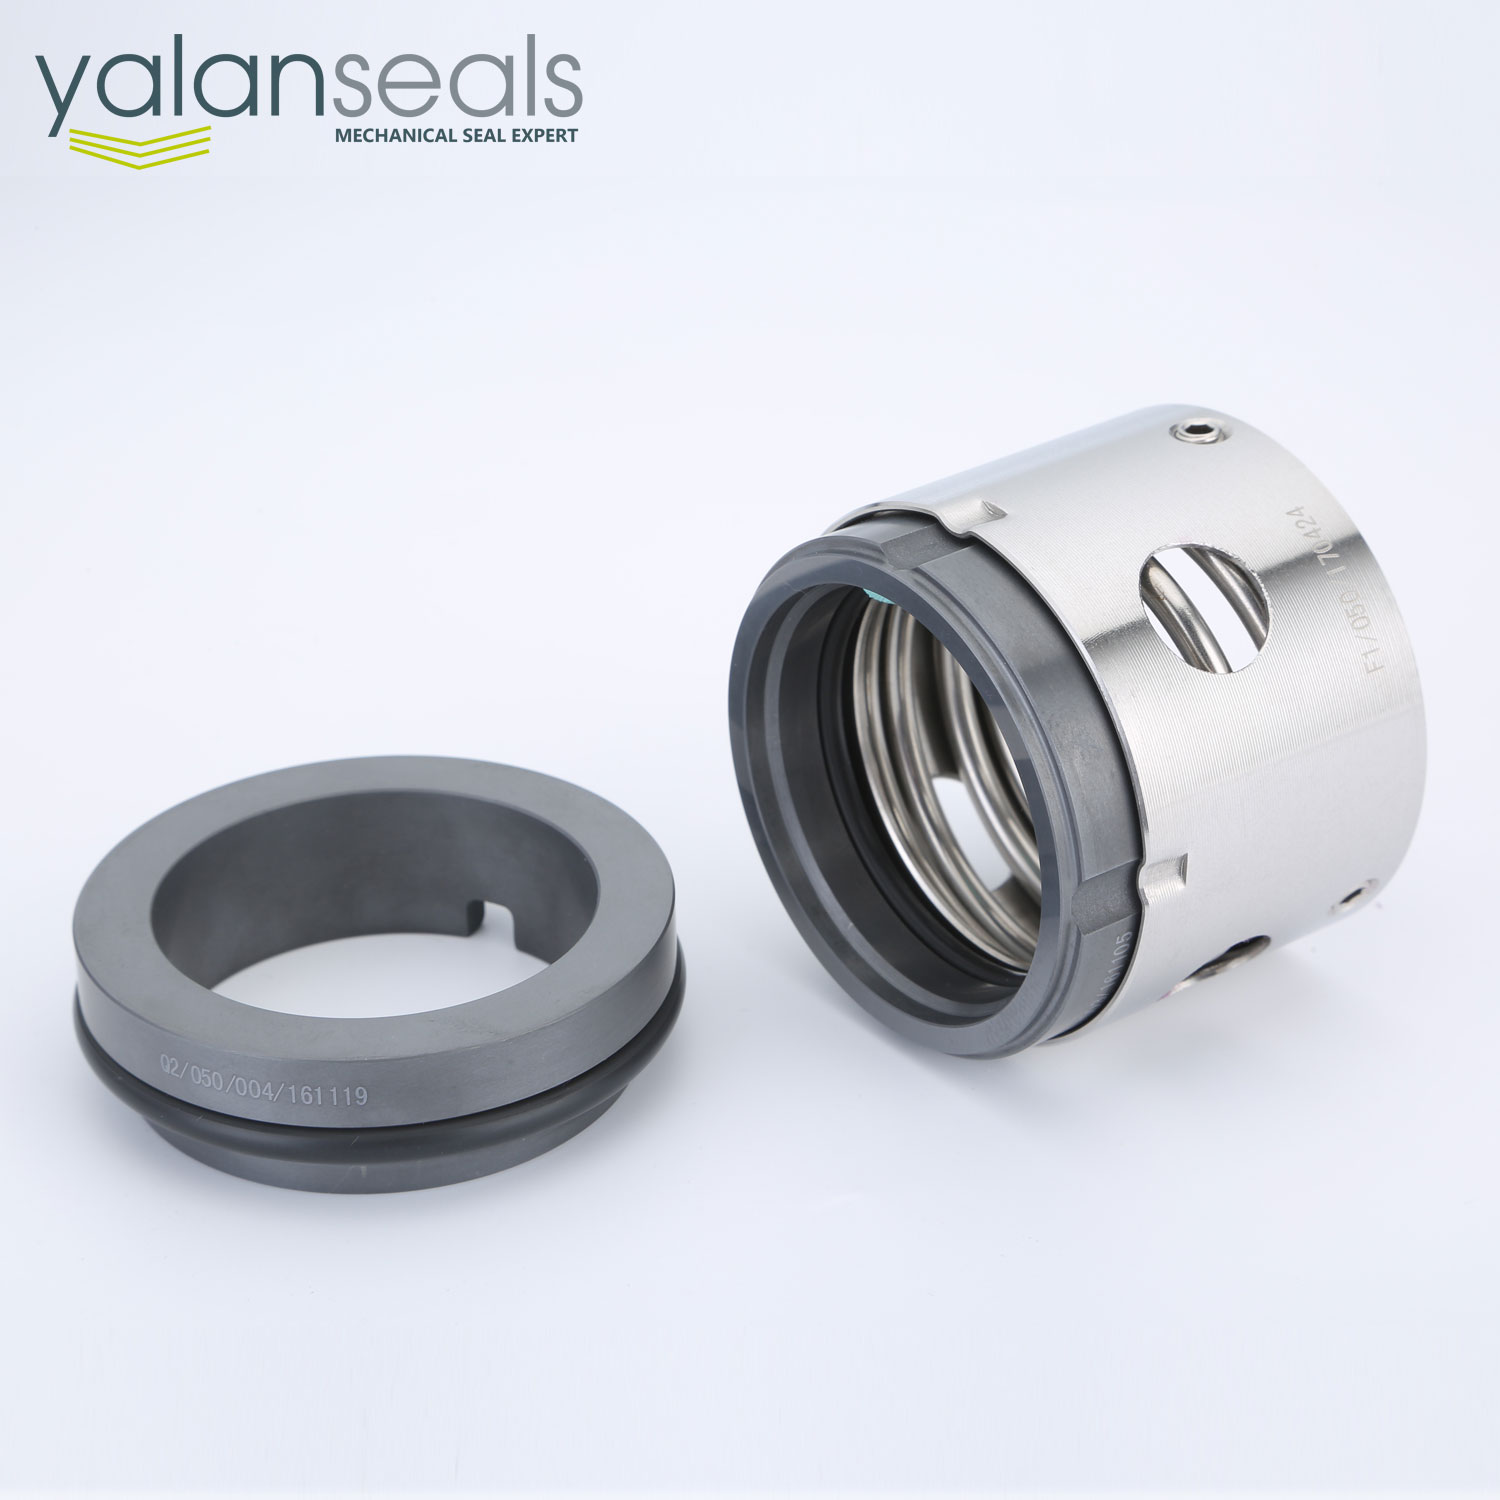 104 Mechanical Seal for Chemical Centrifugal Pumps, Screw Pumps, and Sewage Pumps